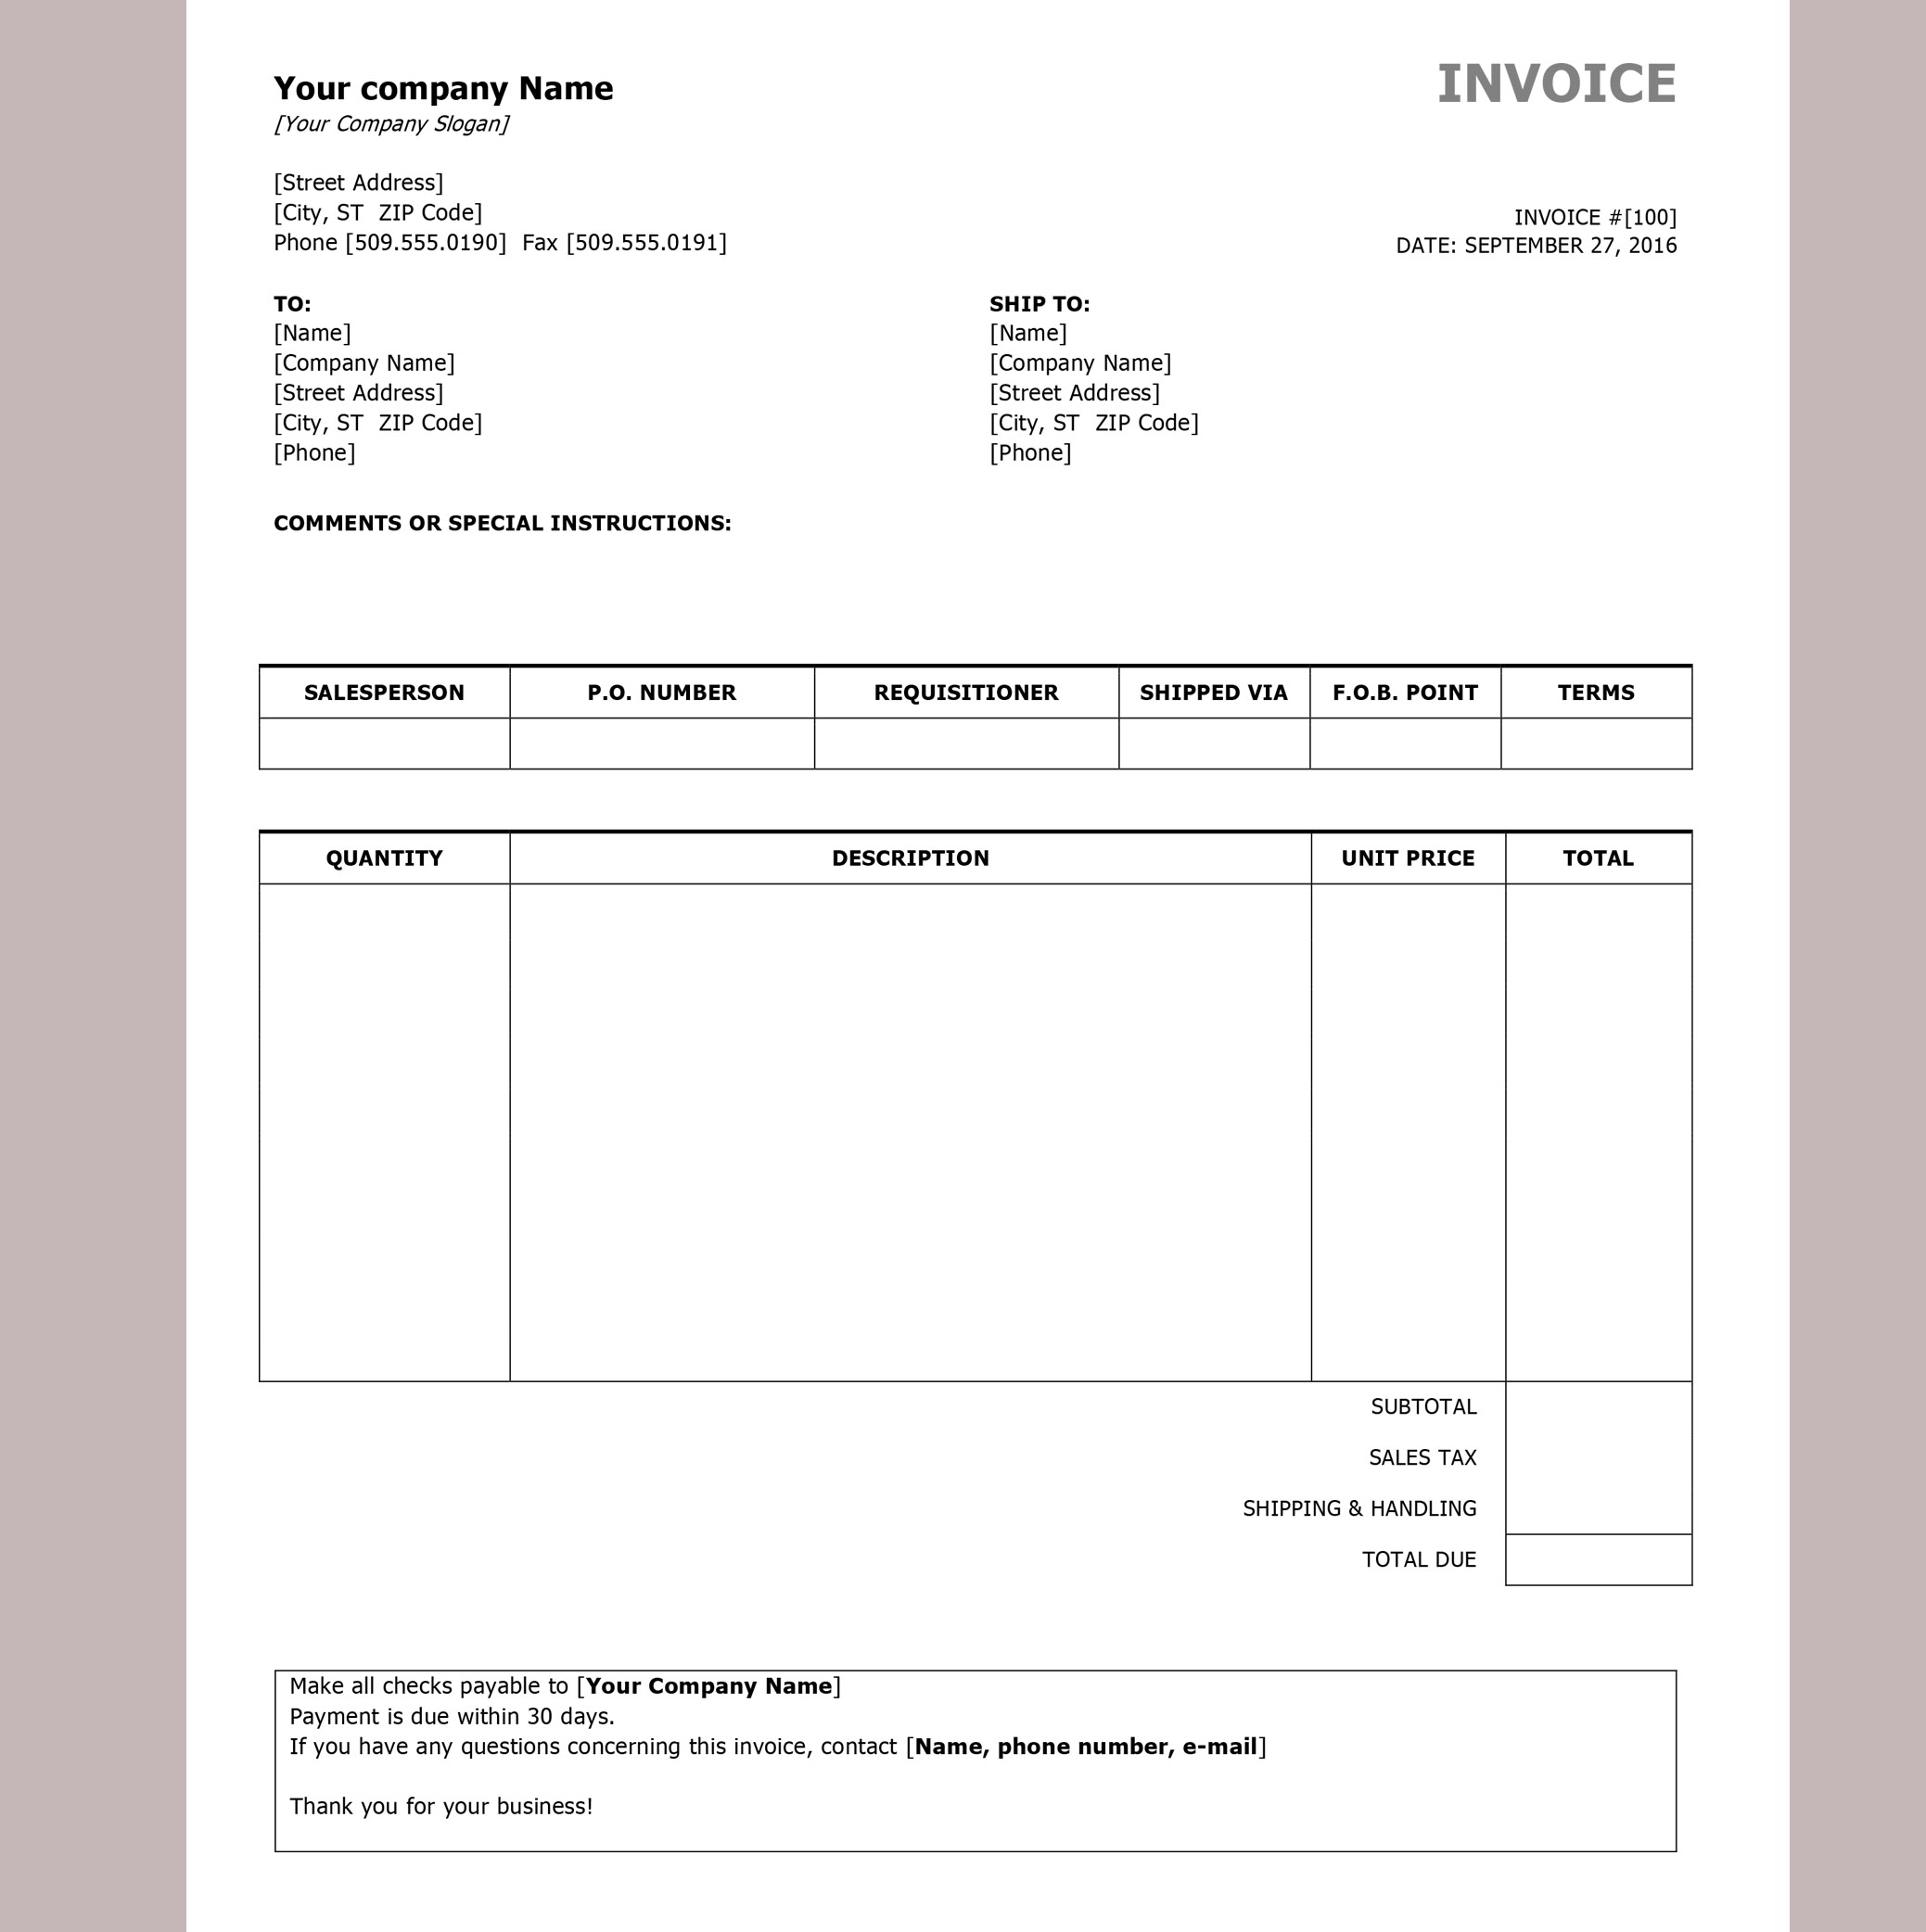 template for a professional invoice